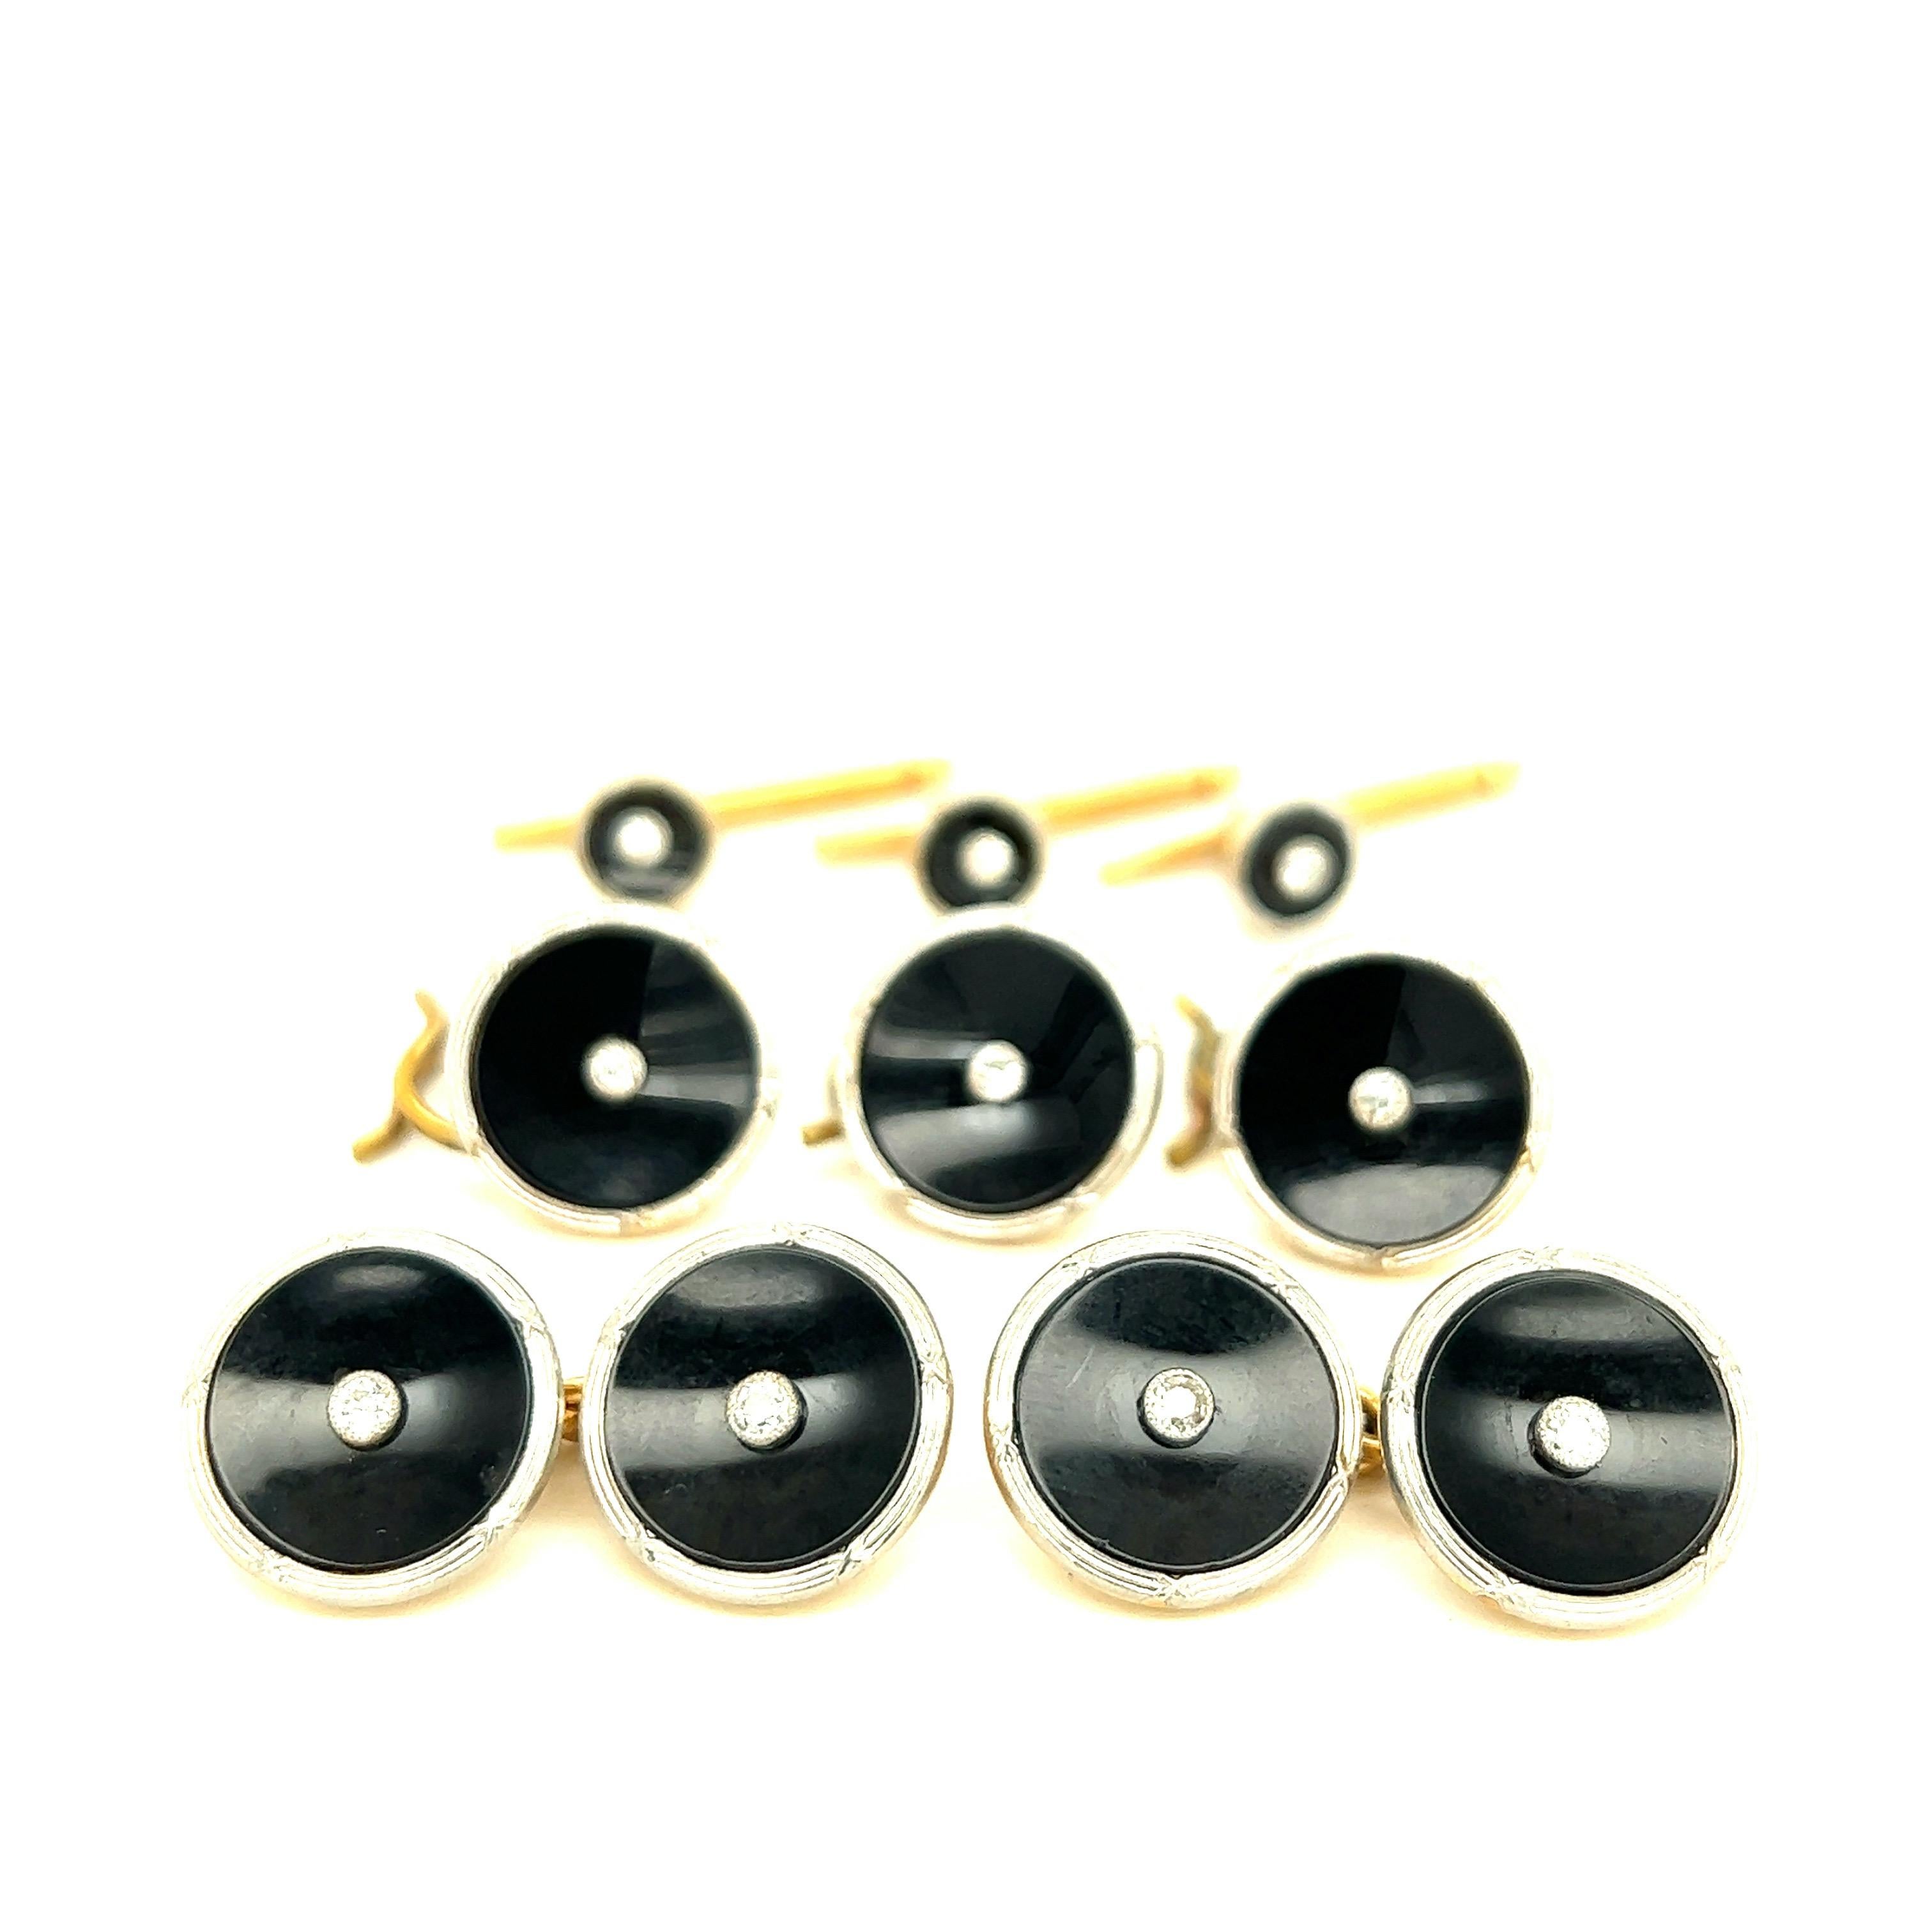 Retailed by Marcus & Co. Black Onyx Diamond Complete Dress Set

Round shape platinum with round shape black onyx discs, featuring round-cut bezel-set diamonds of approximately 0.40 carat and 18 karat yellow gold back

Size: Larger width 14 mm;